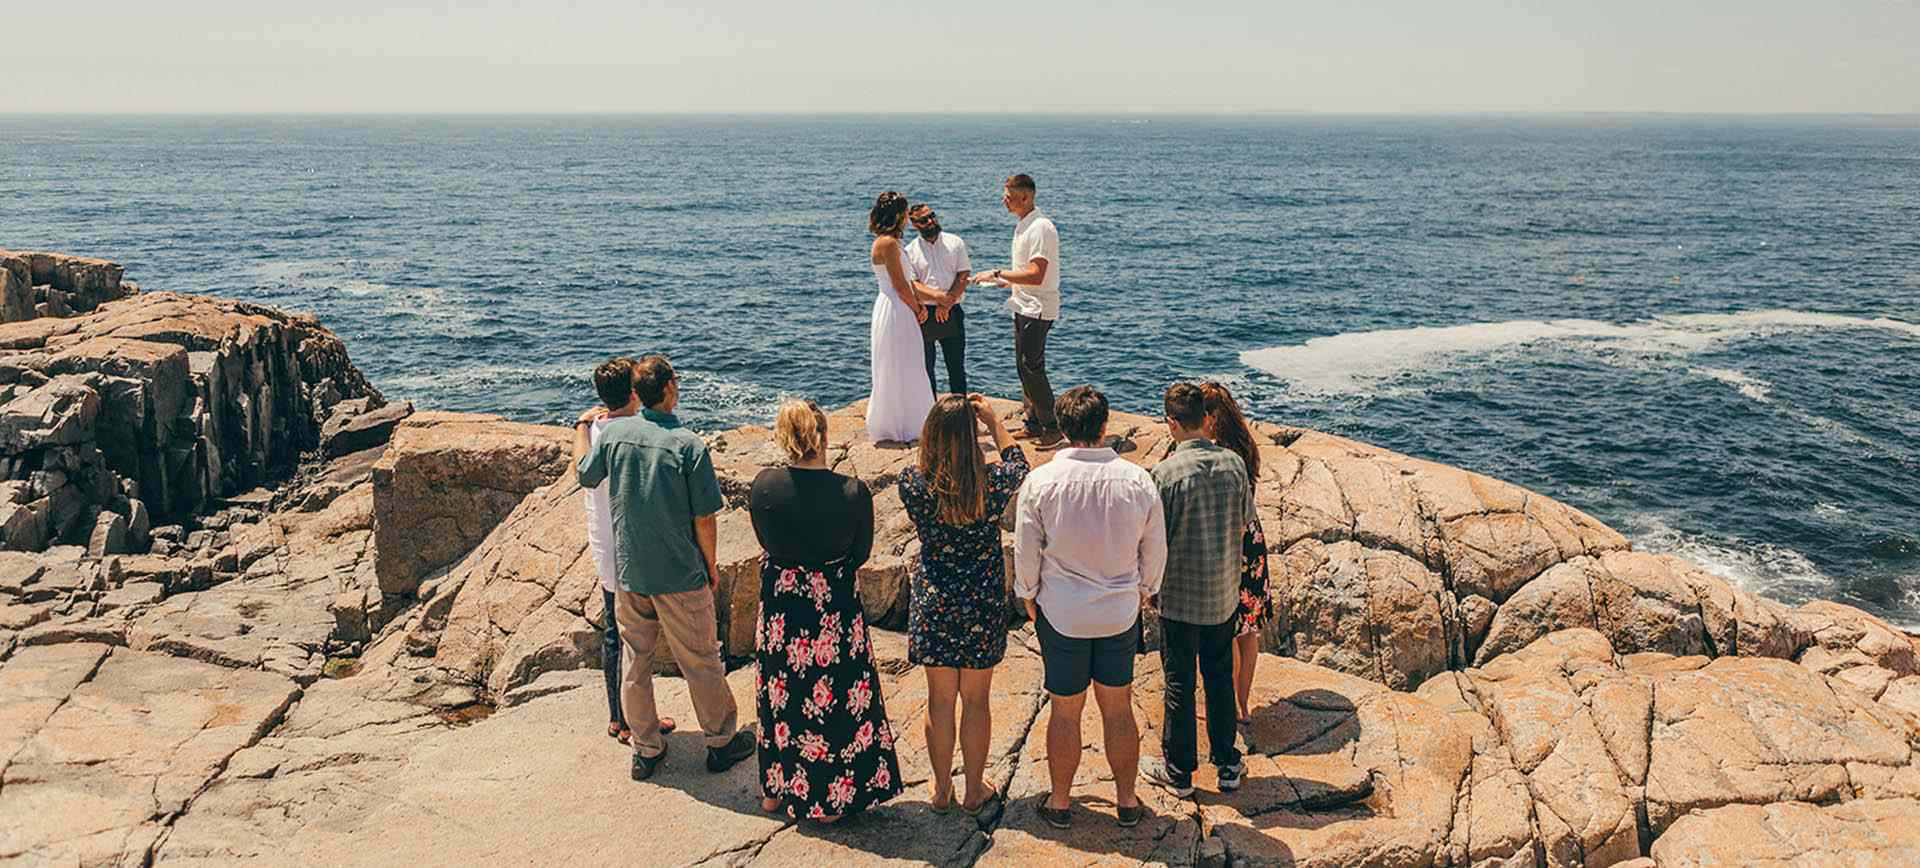 acadia national park wedding - maine elopement ceremony at the beach